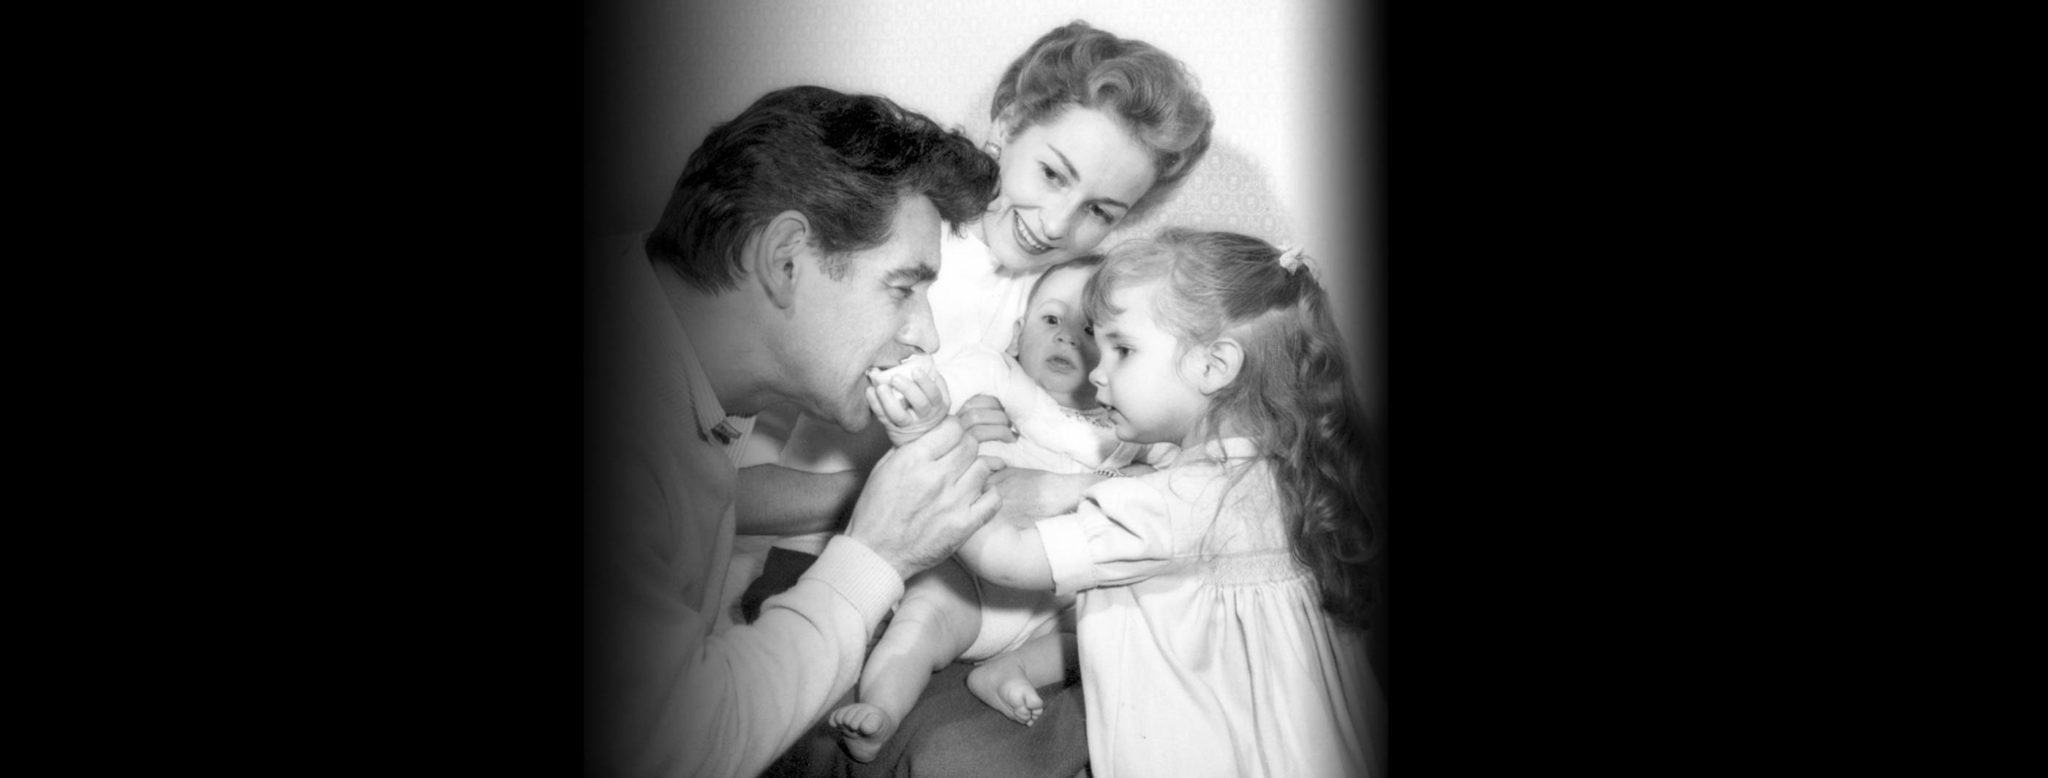 Leonard Bernstein with Felicia, Jamie, and Alexander. (Credit: Library of Congress, Music Division)